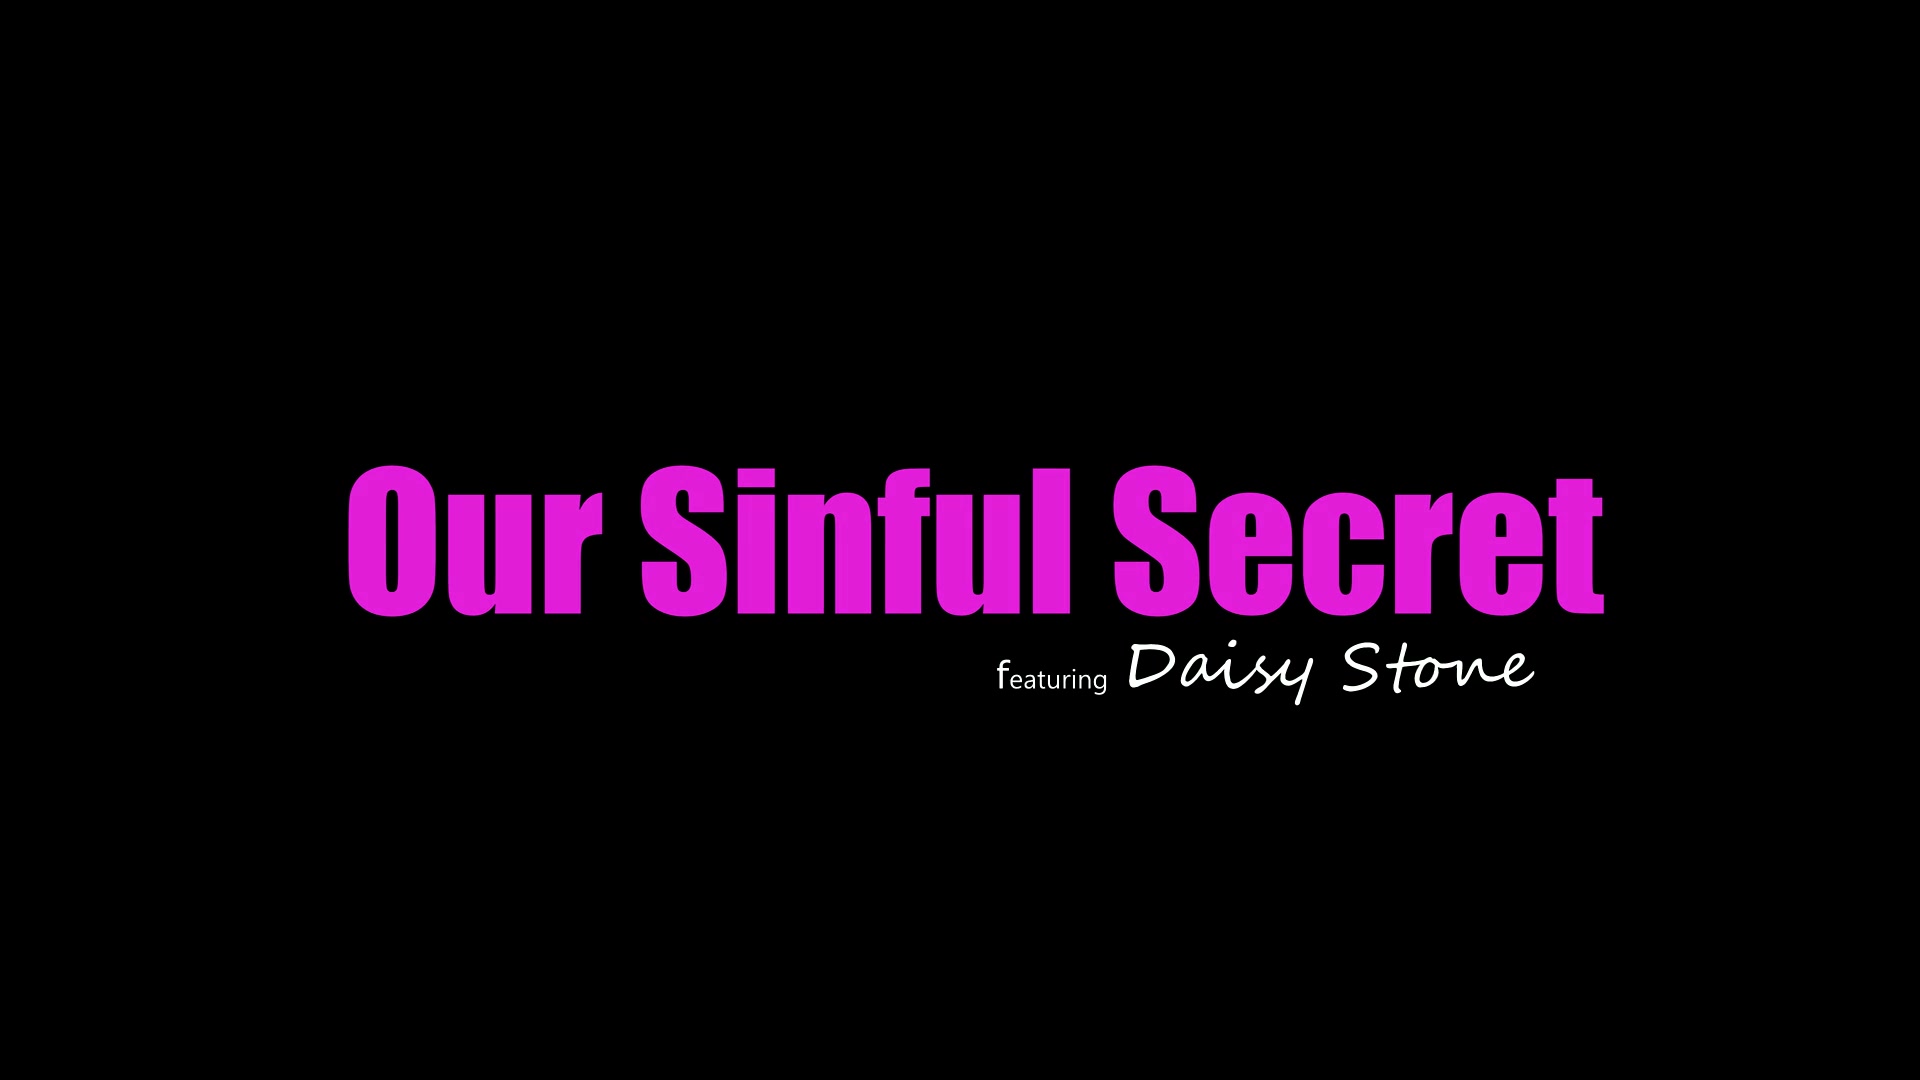 Daisy Stone - Our sinful secret